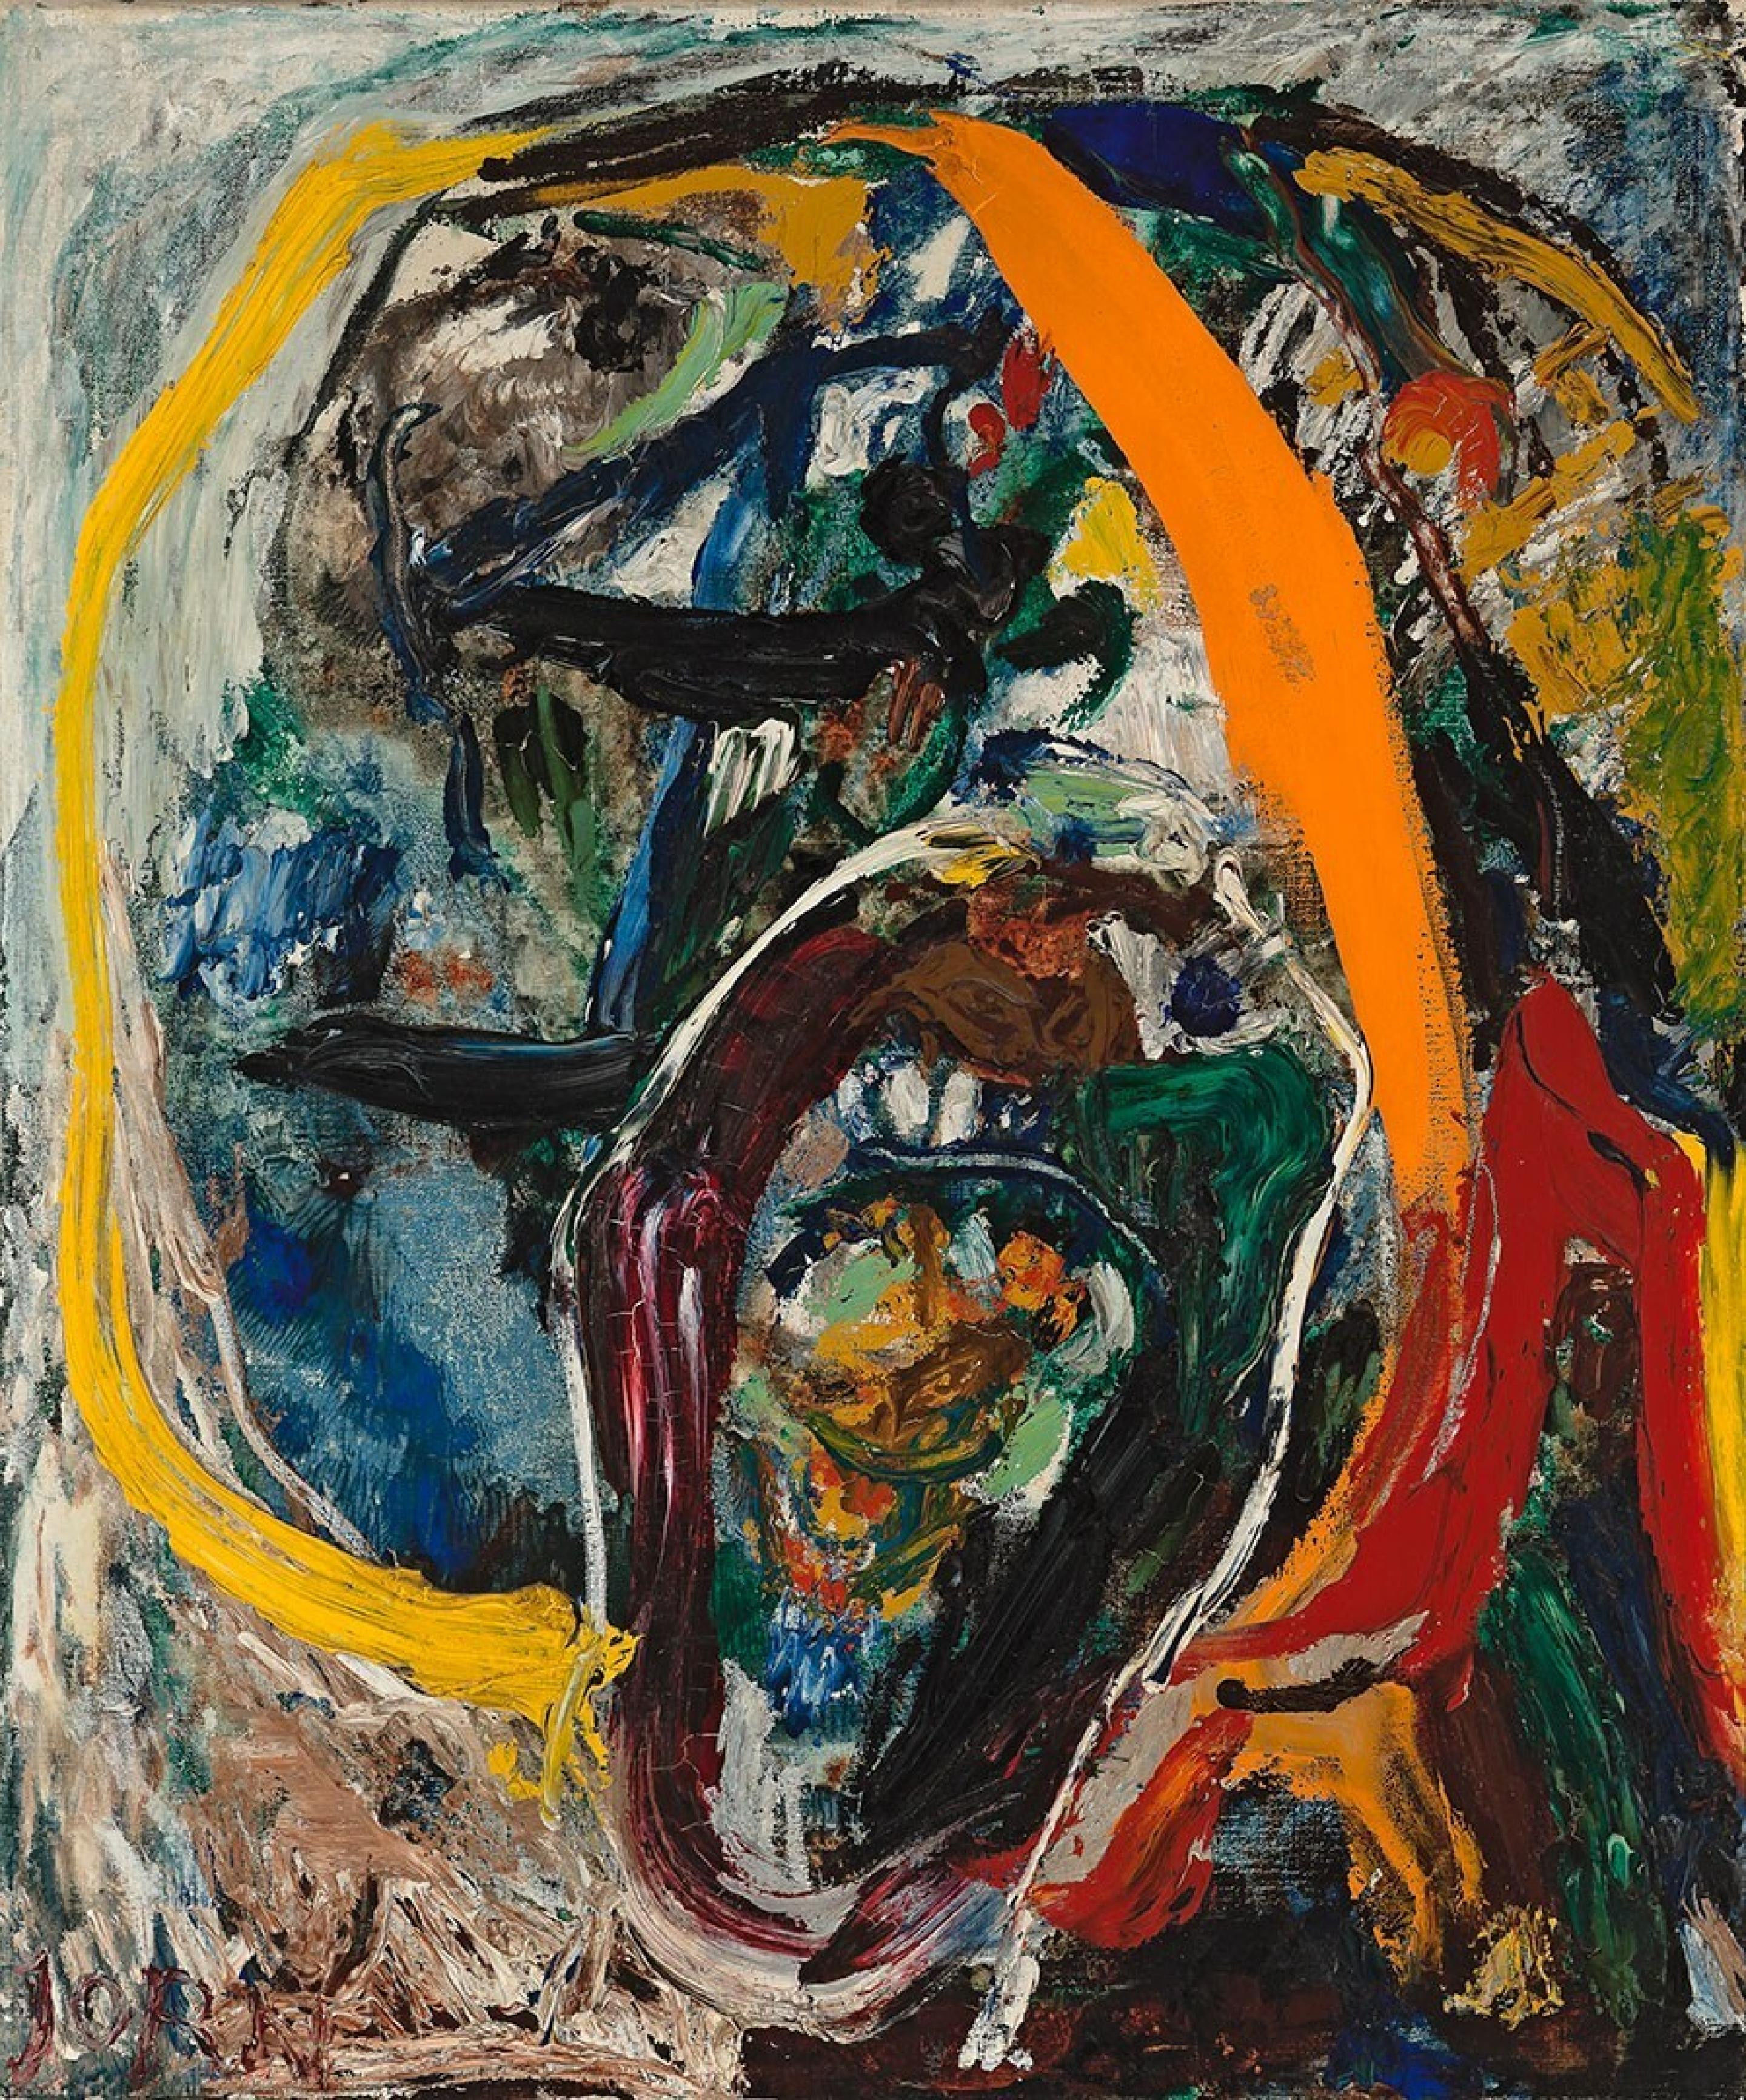 Cobra art; 'Plein Air with Noseless Horses', 1959 by Asger Jorn on display in Museum Boijmans